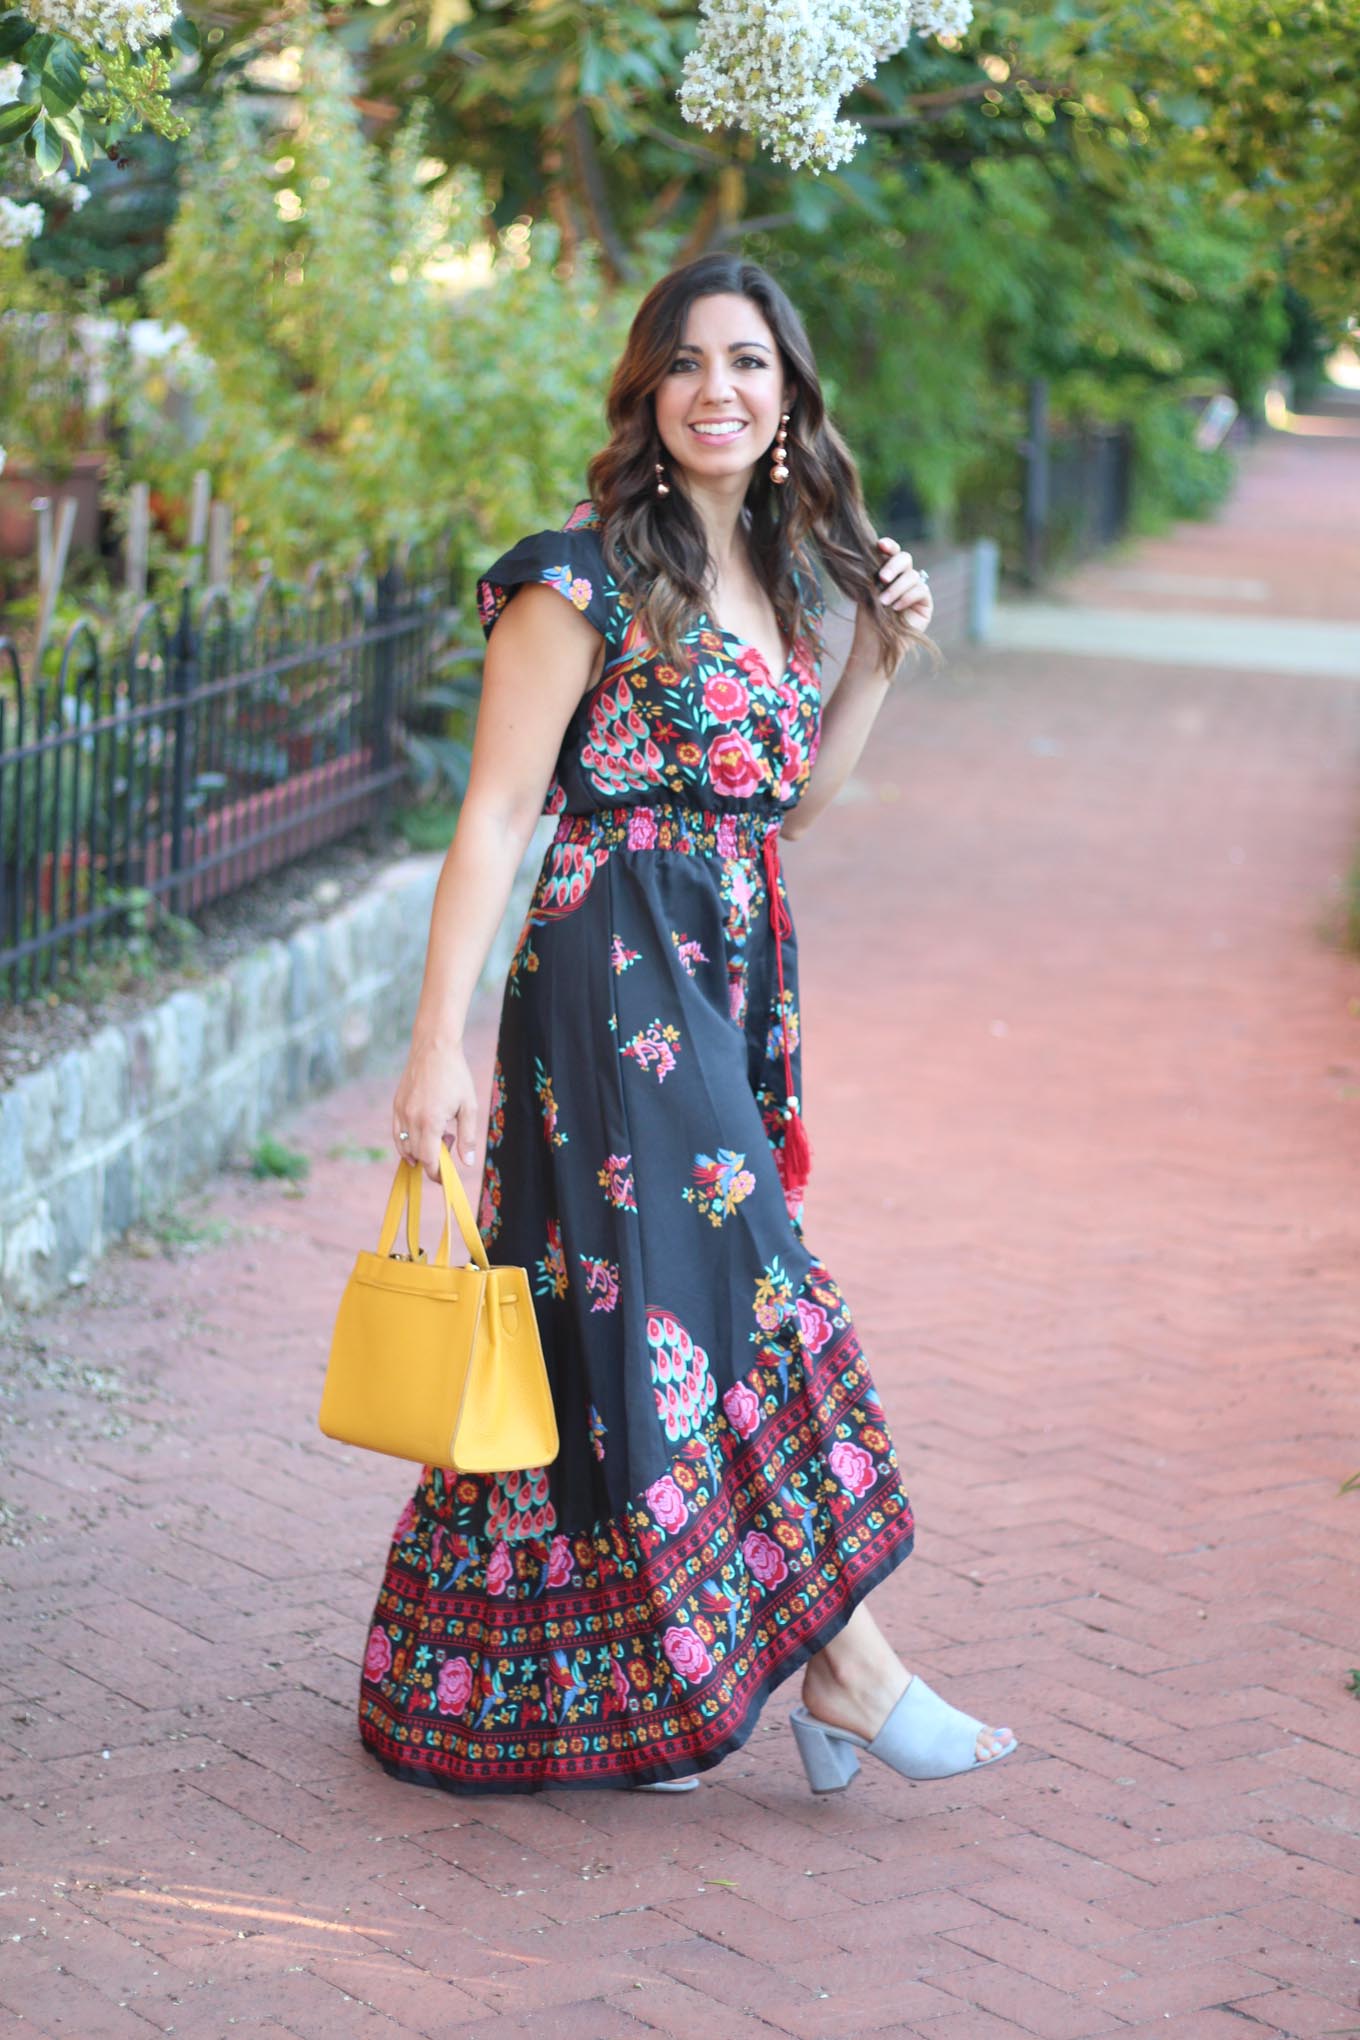 Lifestyle blogger Roxanne of Glass of Glam wearing a navy blue floral high low dress, Kate Spade bag, and Baublebar Earrings